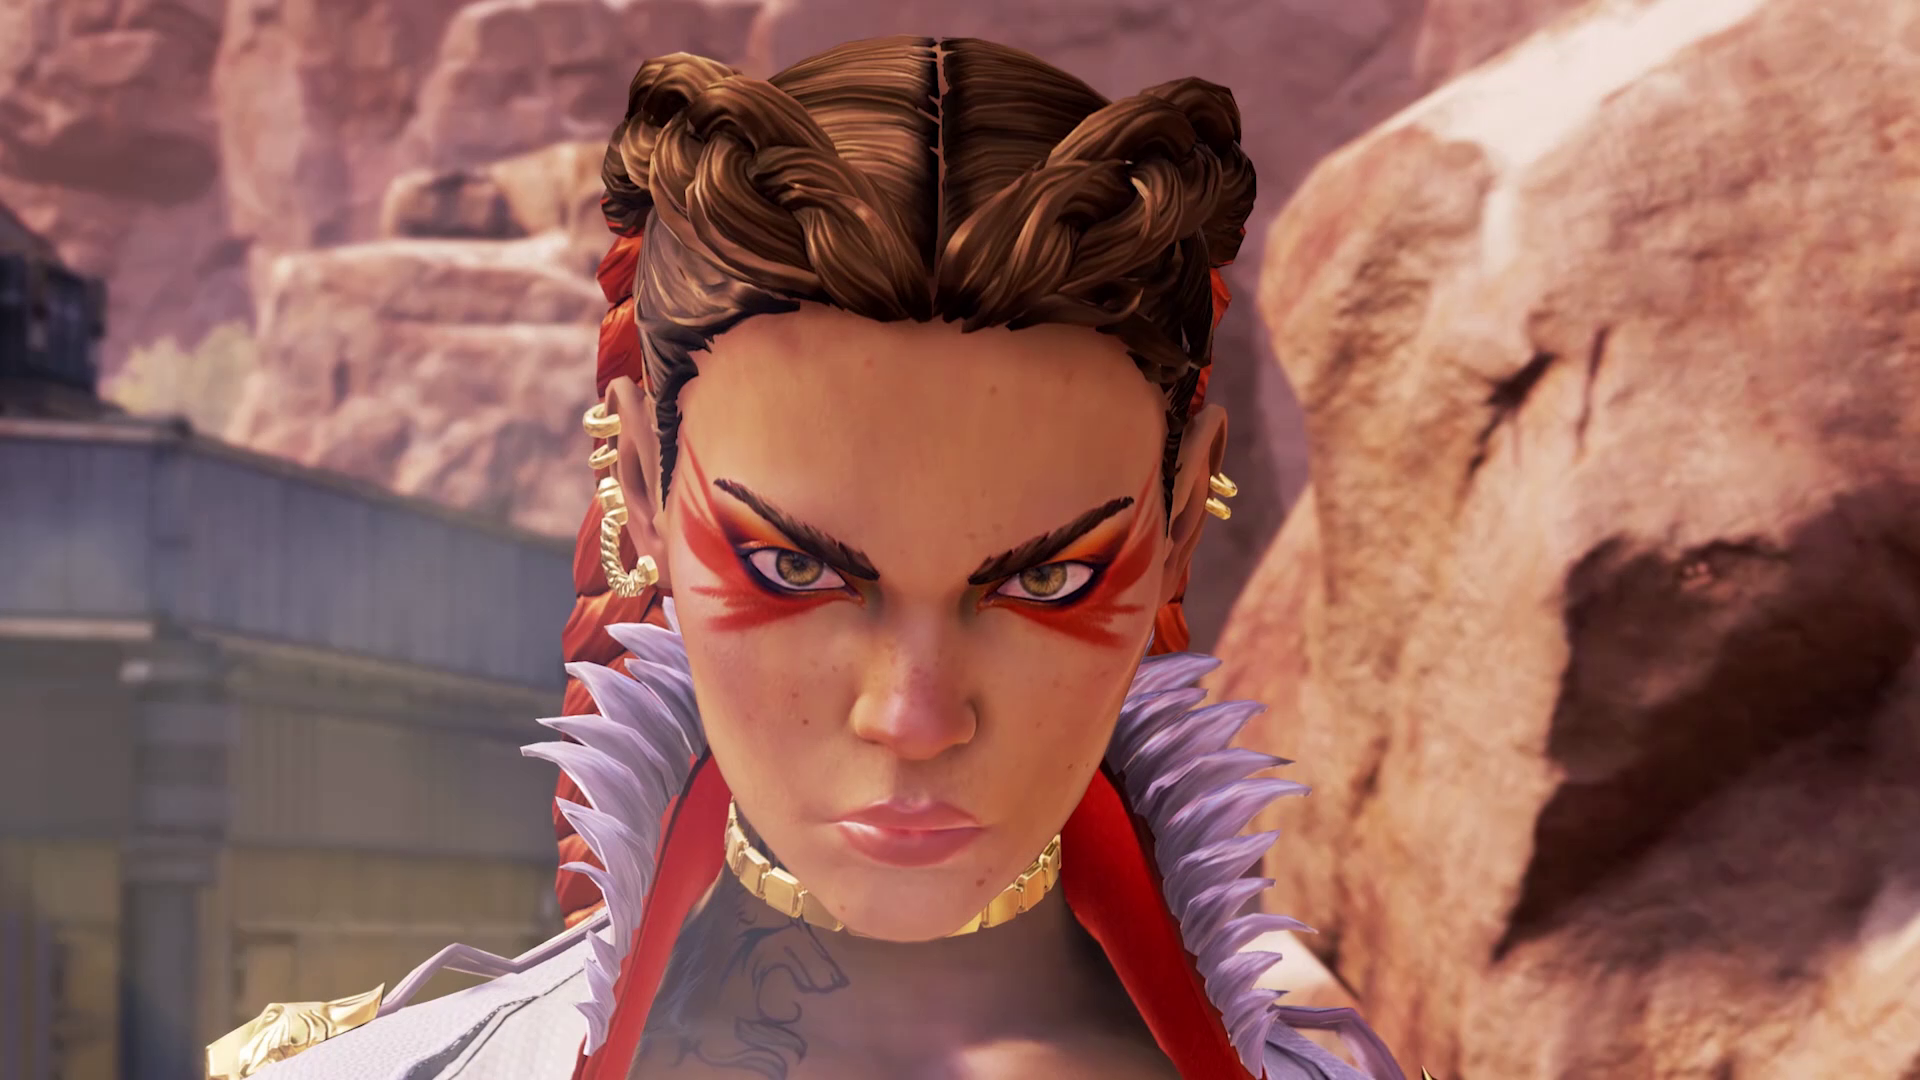 Apex Legends Season 5 release time – Loba arrives May 12